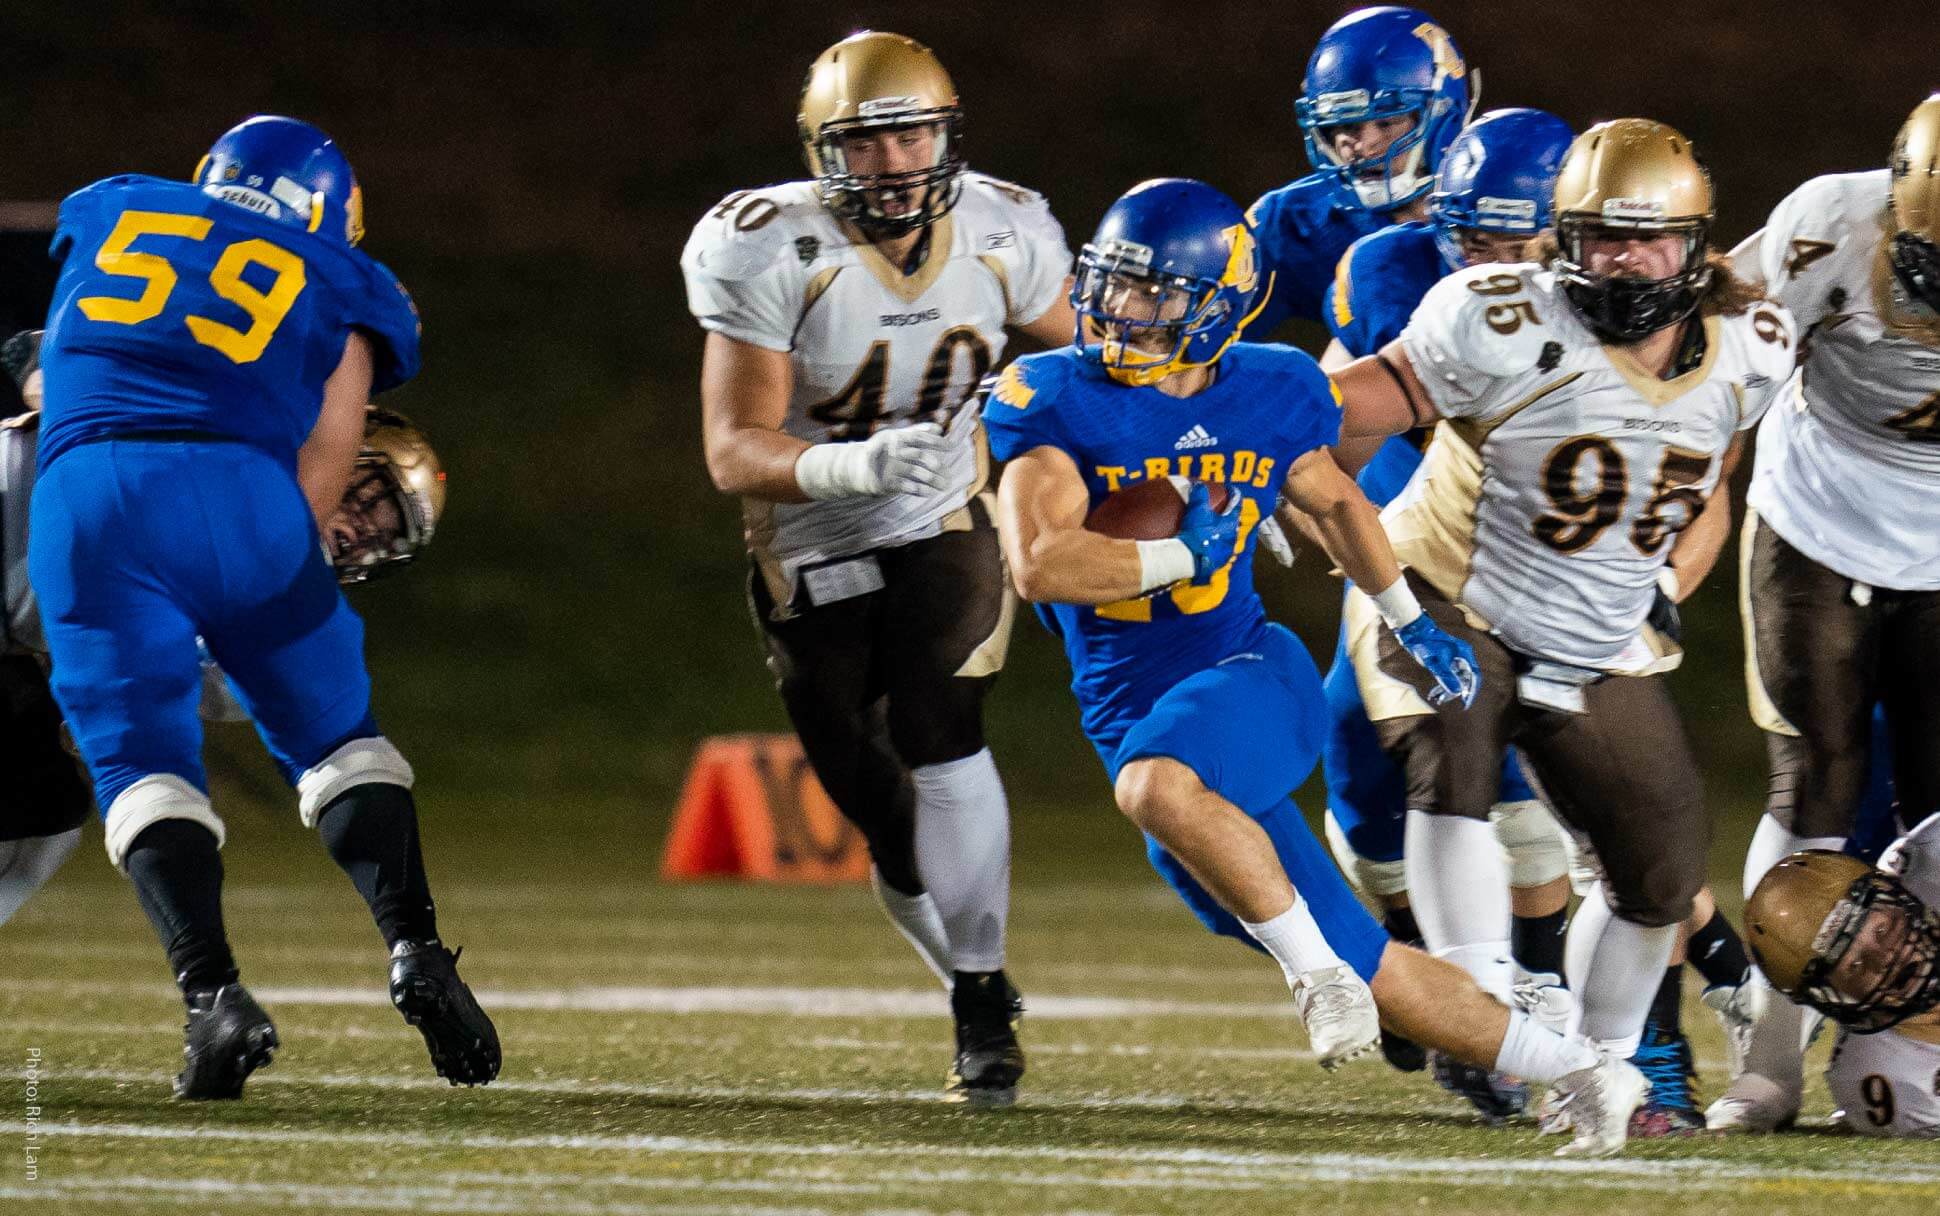 An athlete runs with a football during a UBC Thunderbirds Football game in Vancouver